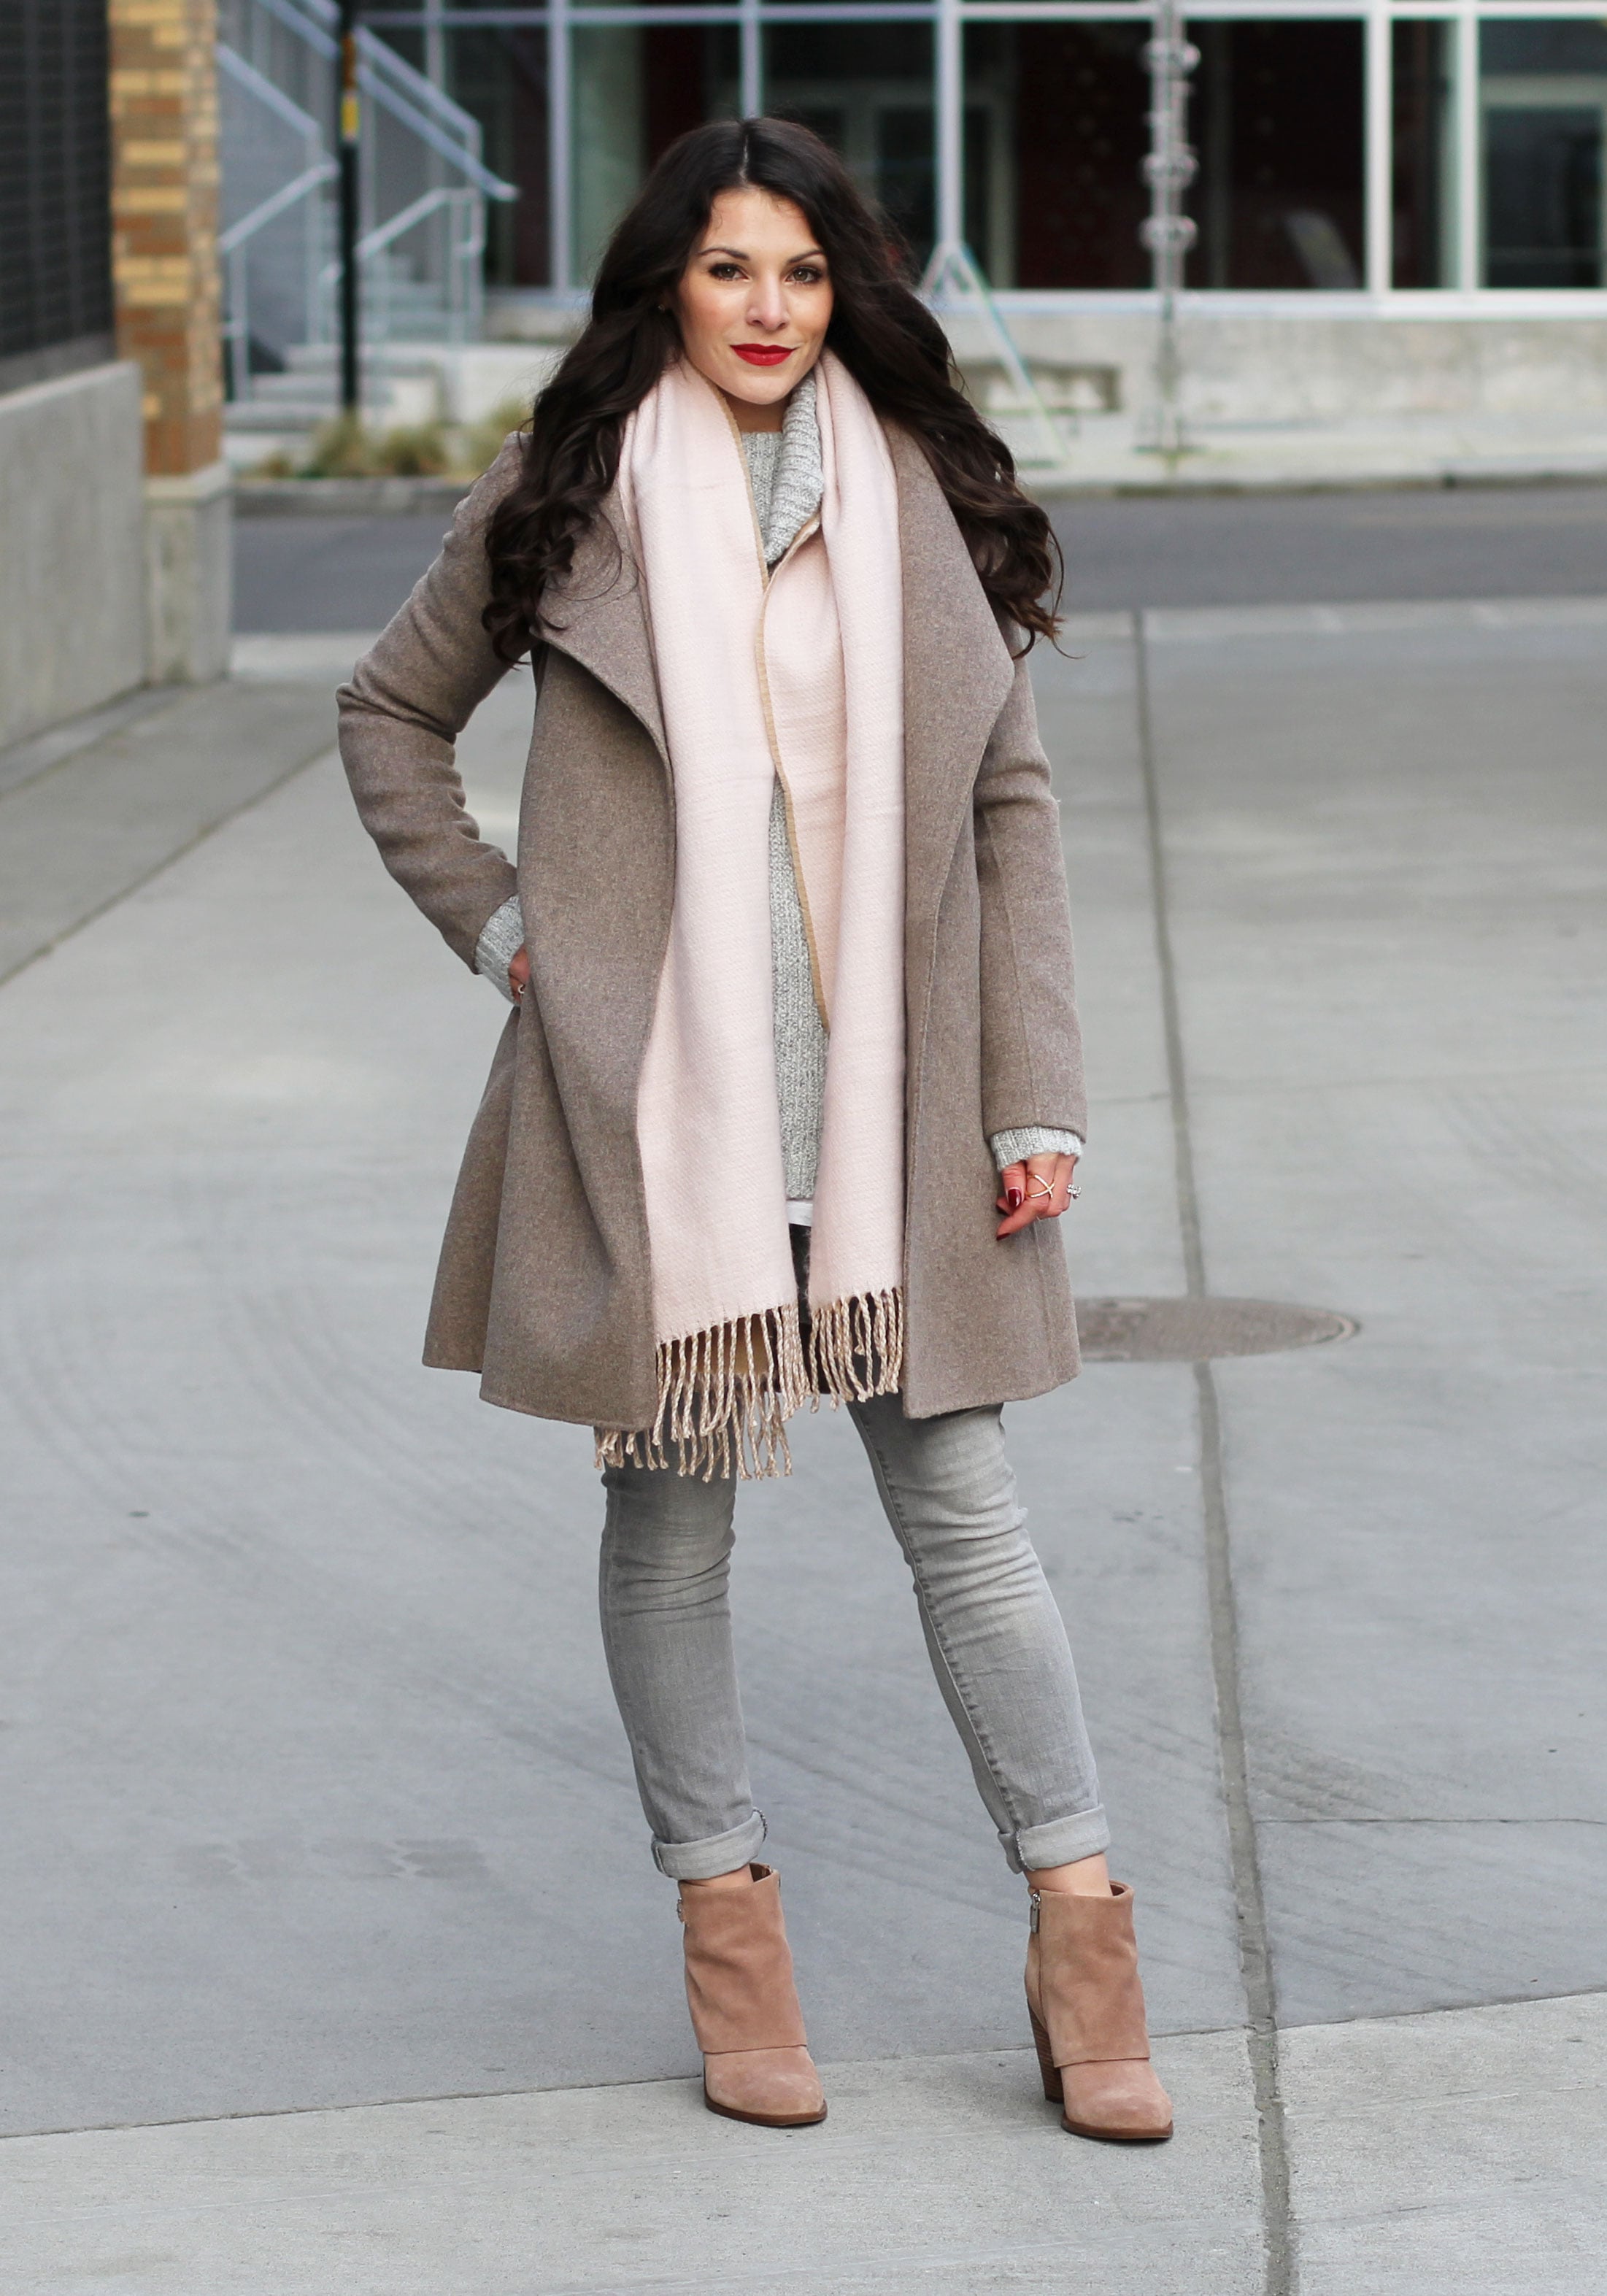 Gray Outfit, Groutfit, Winter Outfit, Forever 21 Ribbed Turtleneck Sweater, Gap Skinny Jeans, Jessica Simpson Nude Suede Booties, Blush Pink Scarf, Banana Republic Belted Wrap Coat